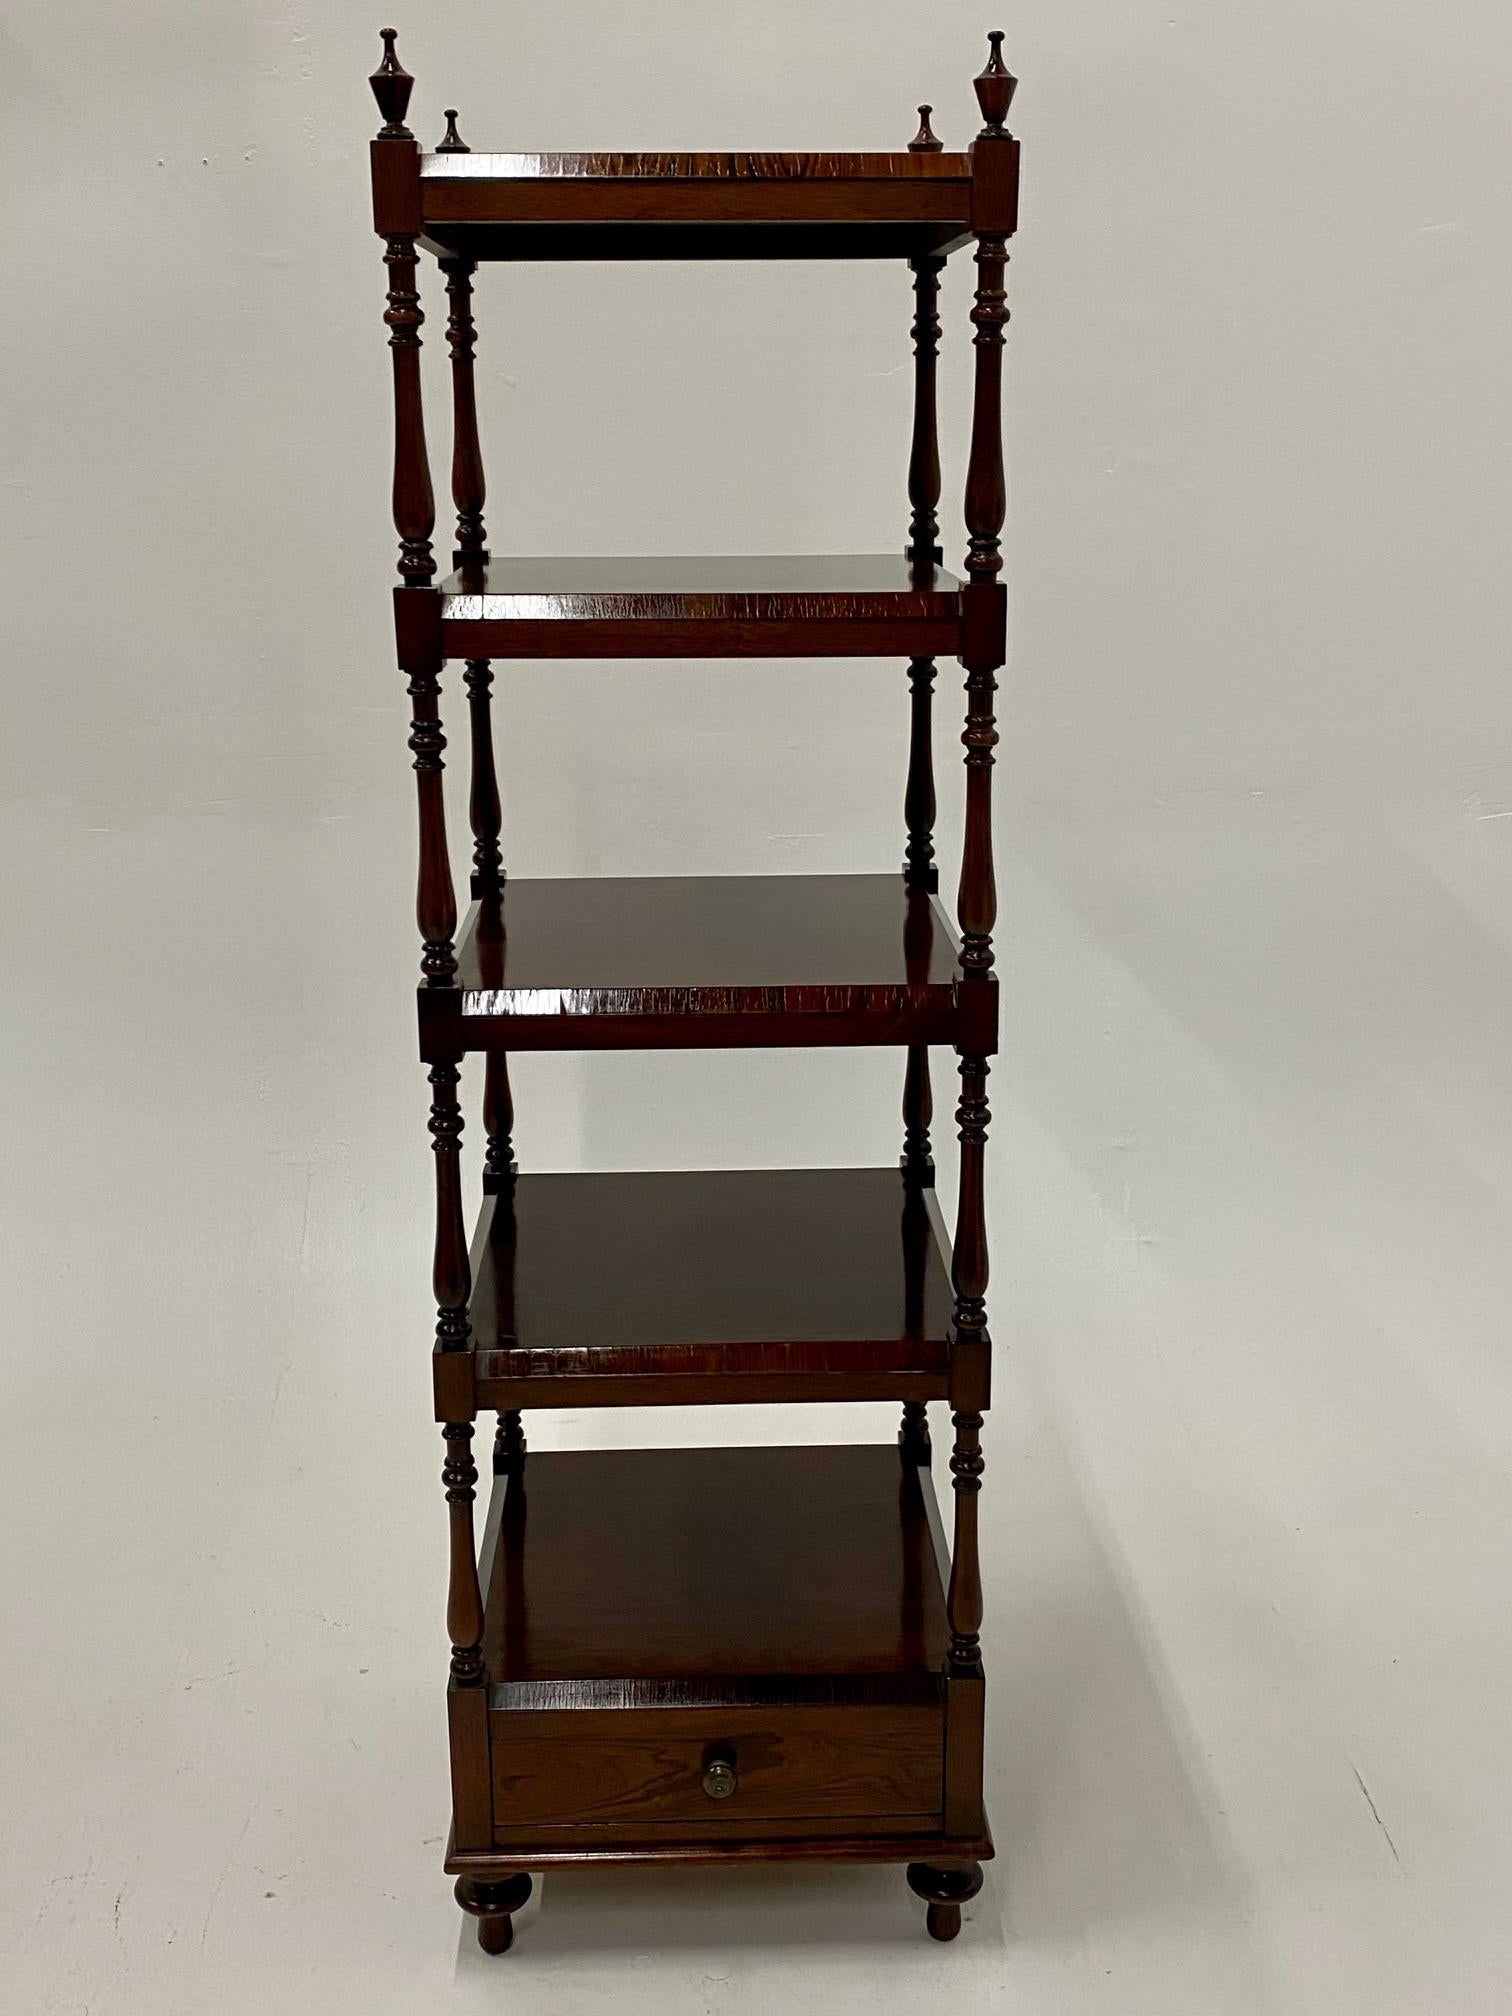 A beautifully made solid rosewood etagere with sumptuous grain having 4 shelves, single drawer in the bottom compartment, and 4 classy finials at the top corners.
60